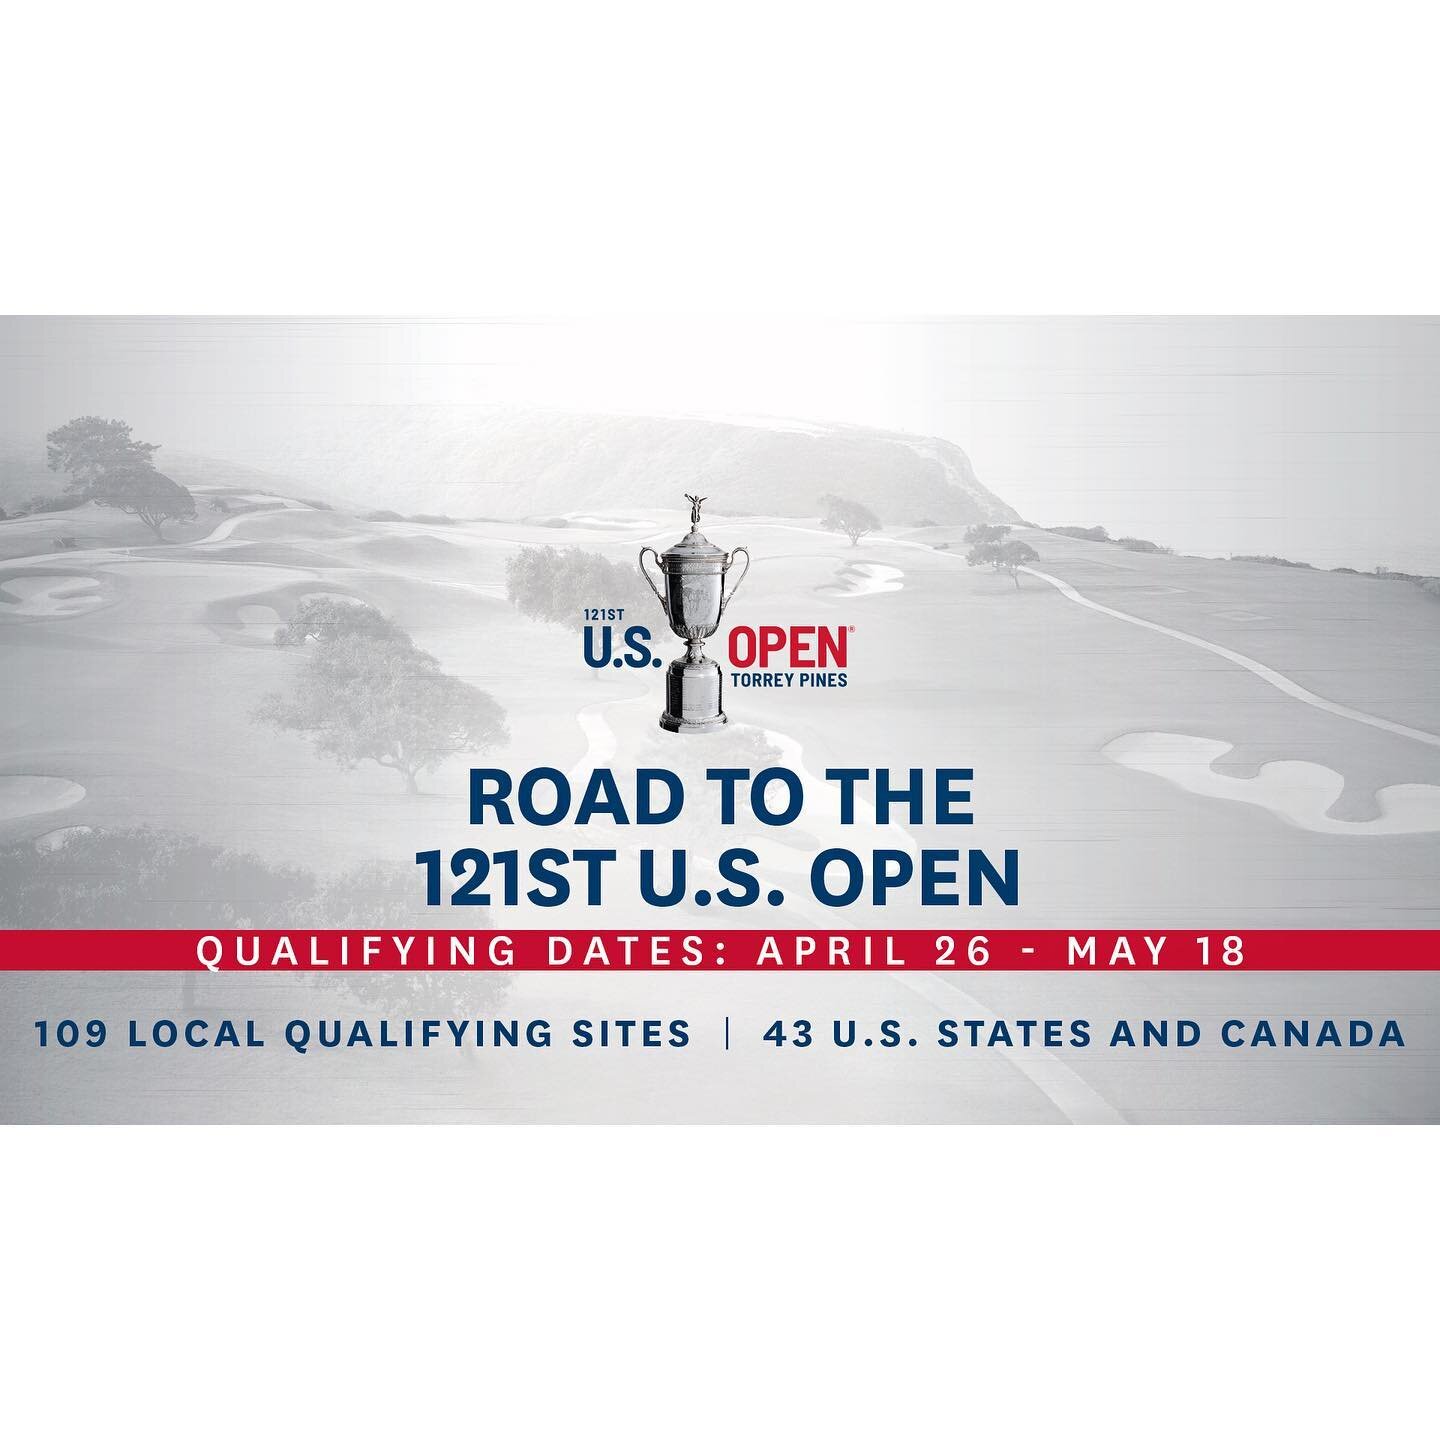 6 days from our next tournament: U.S. Open Qualifying Prep at River Landing in Wallace, NC!

Wednesday, April 28th the Gator Tour will be playing at 2021 U.S. Open Qualifier site, River Landing (River Course) 

The max field size at River Landing is 